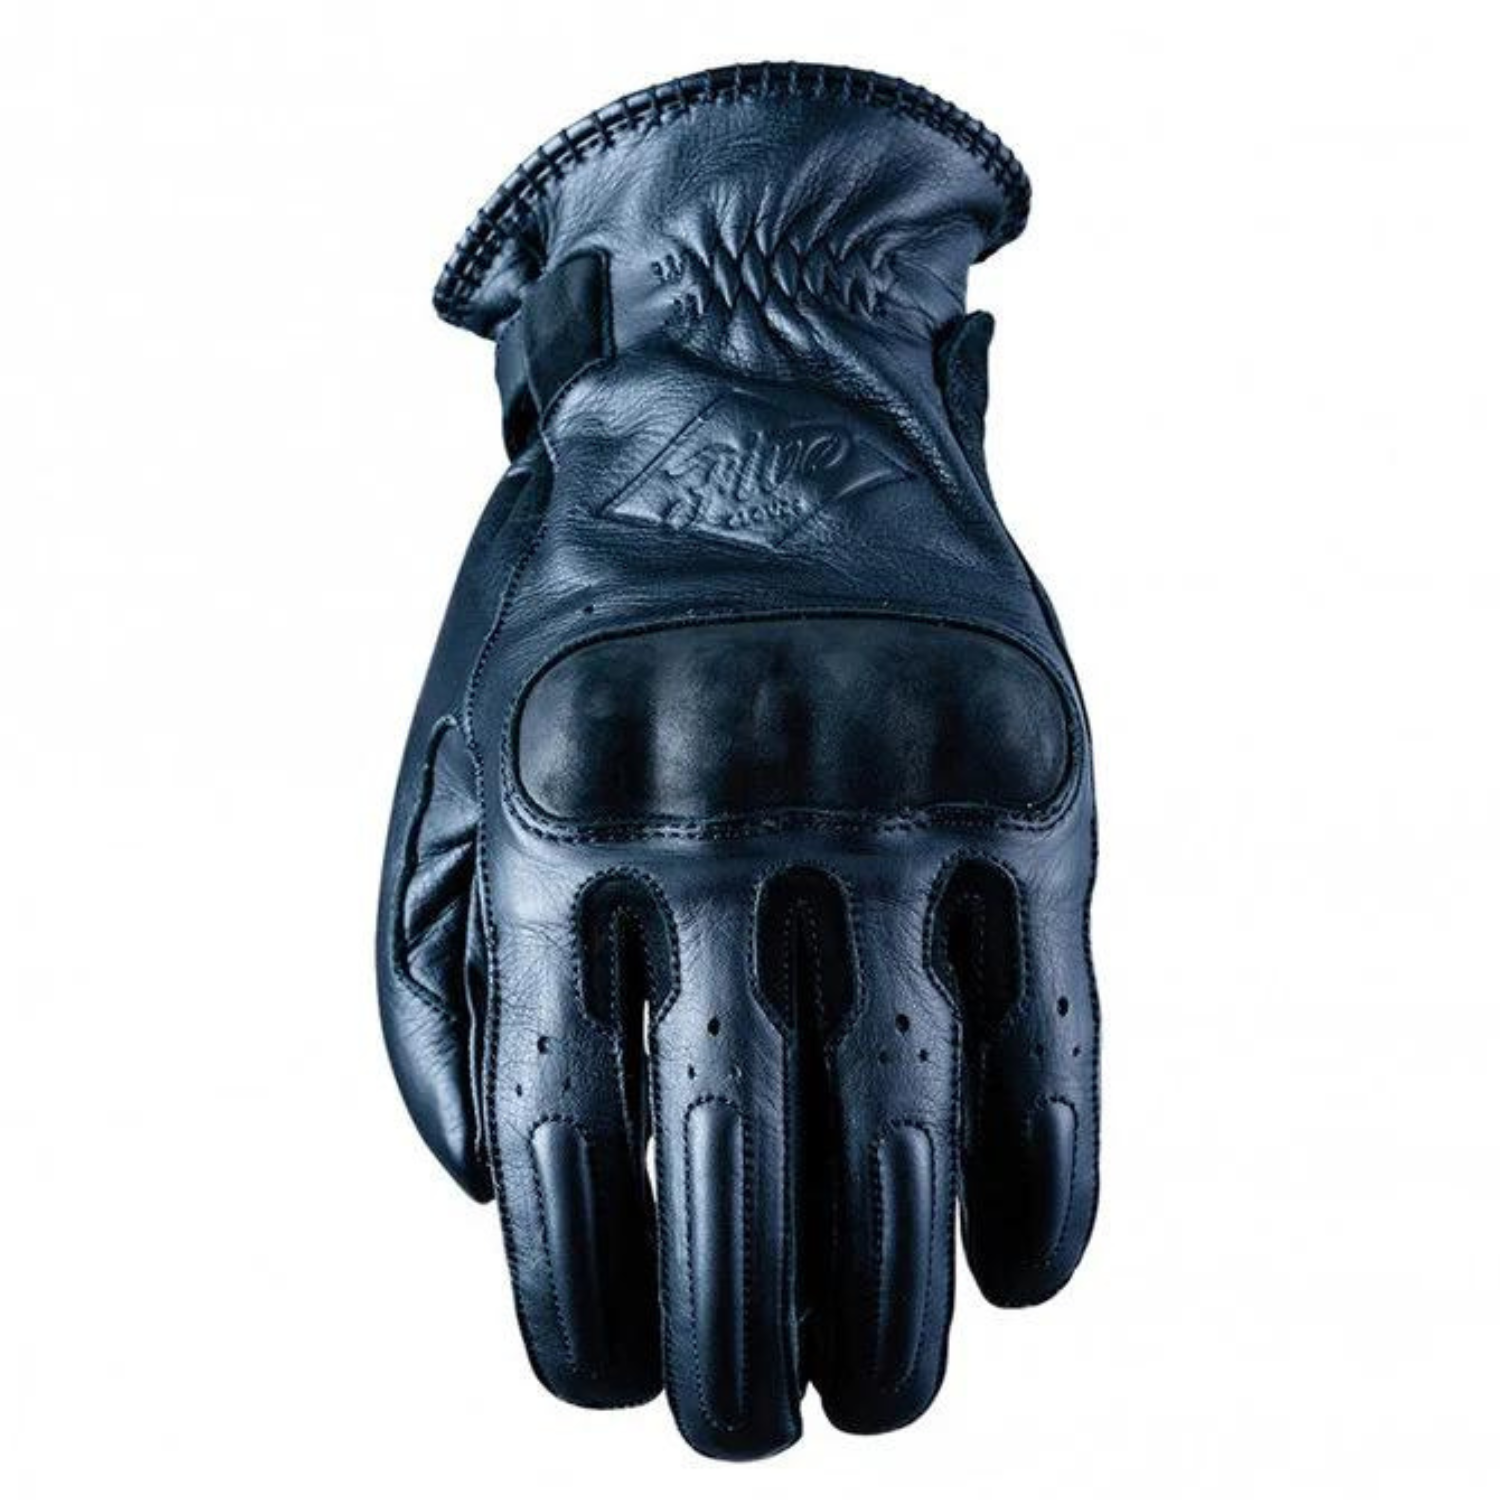 Image of Five Oklahoma Gloves Black Size L ID 4770916487603